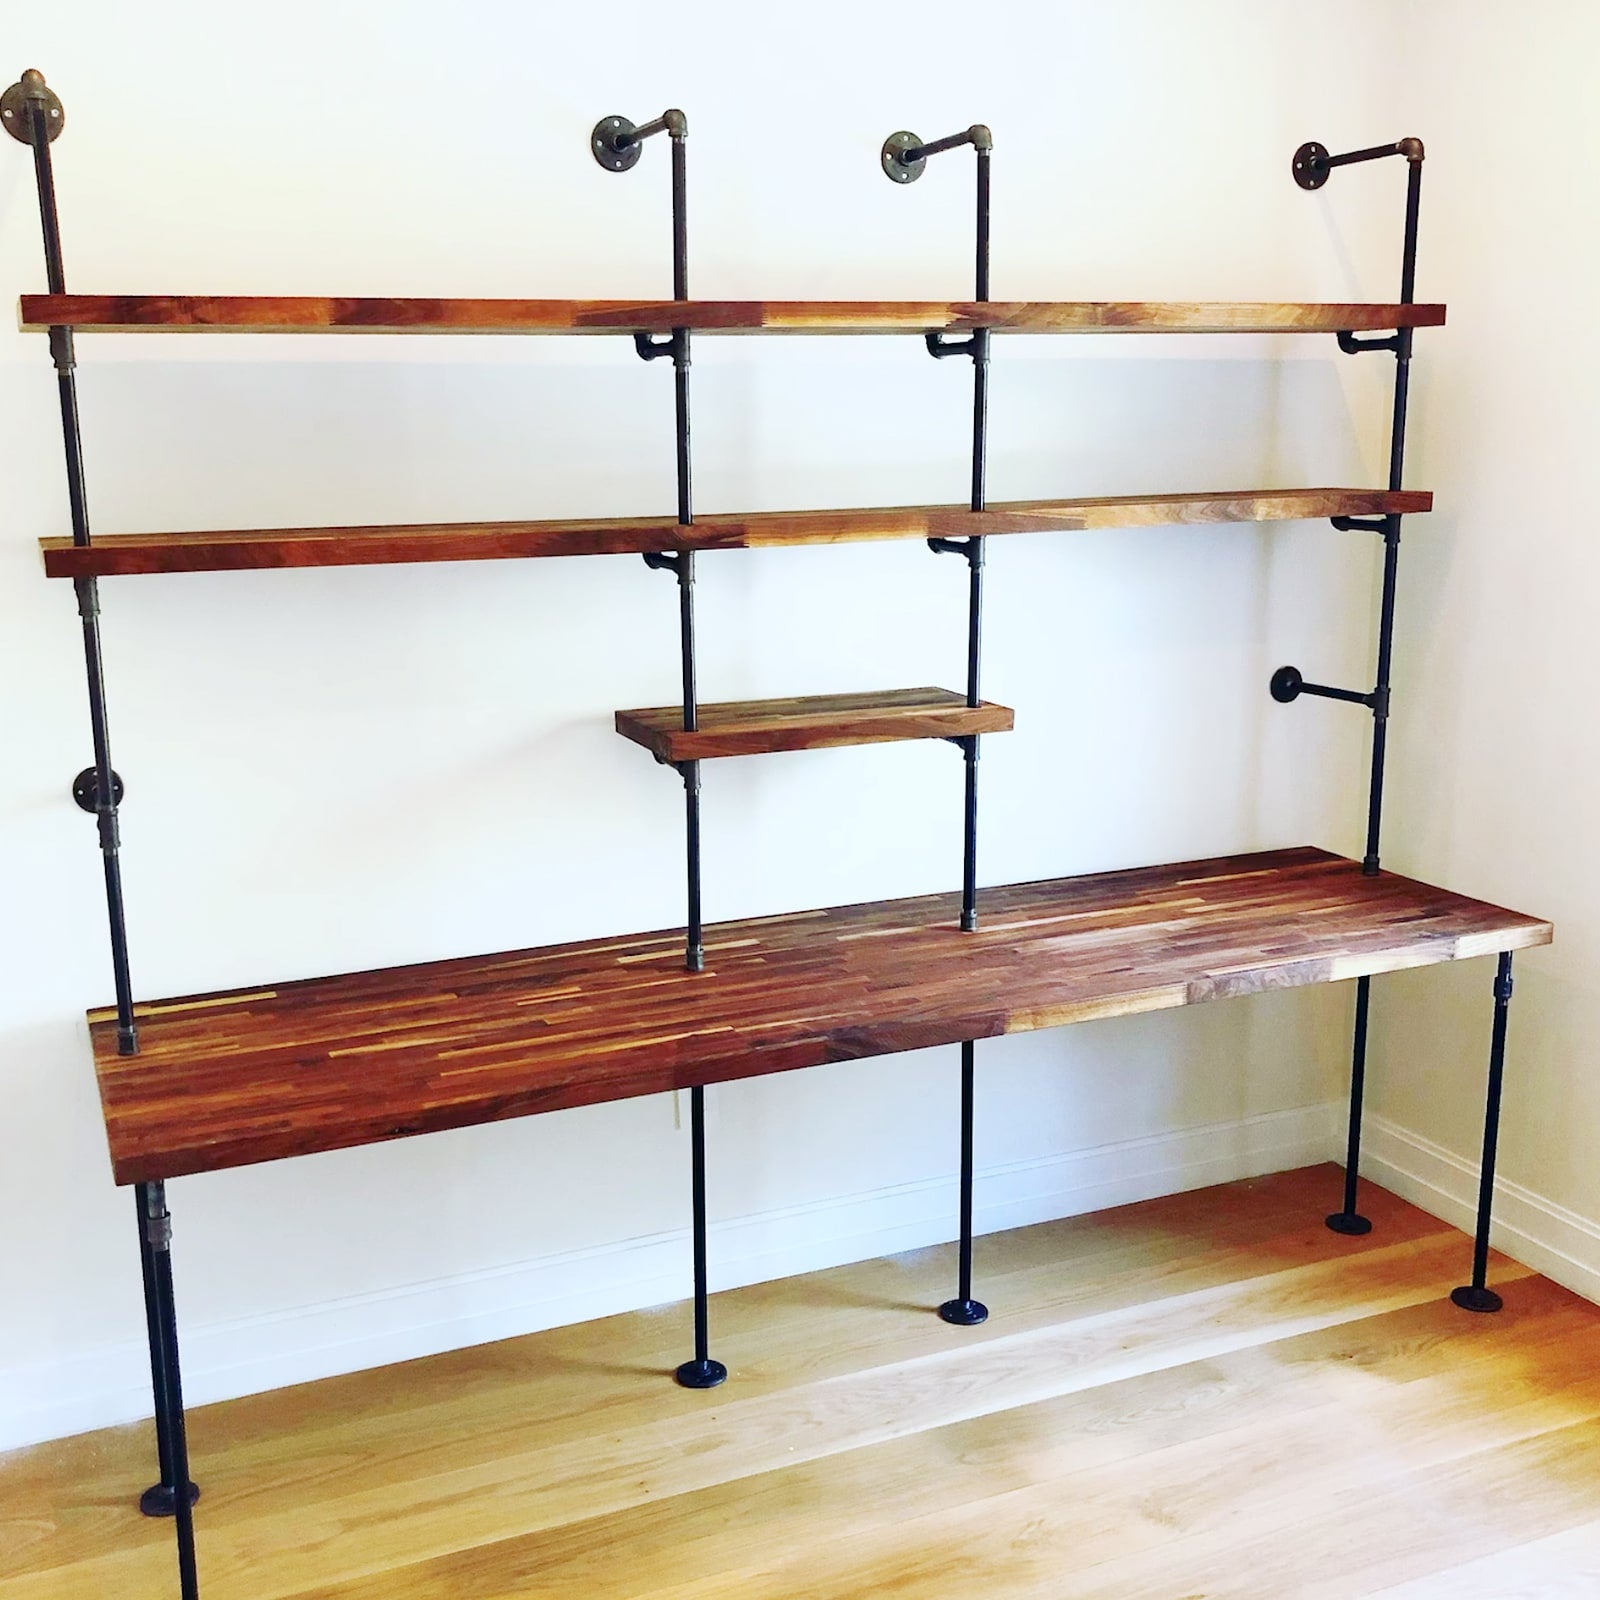 soil & oak double built-in desk with black pipes and American walnut butcher block shelves